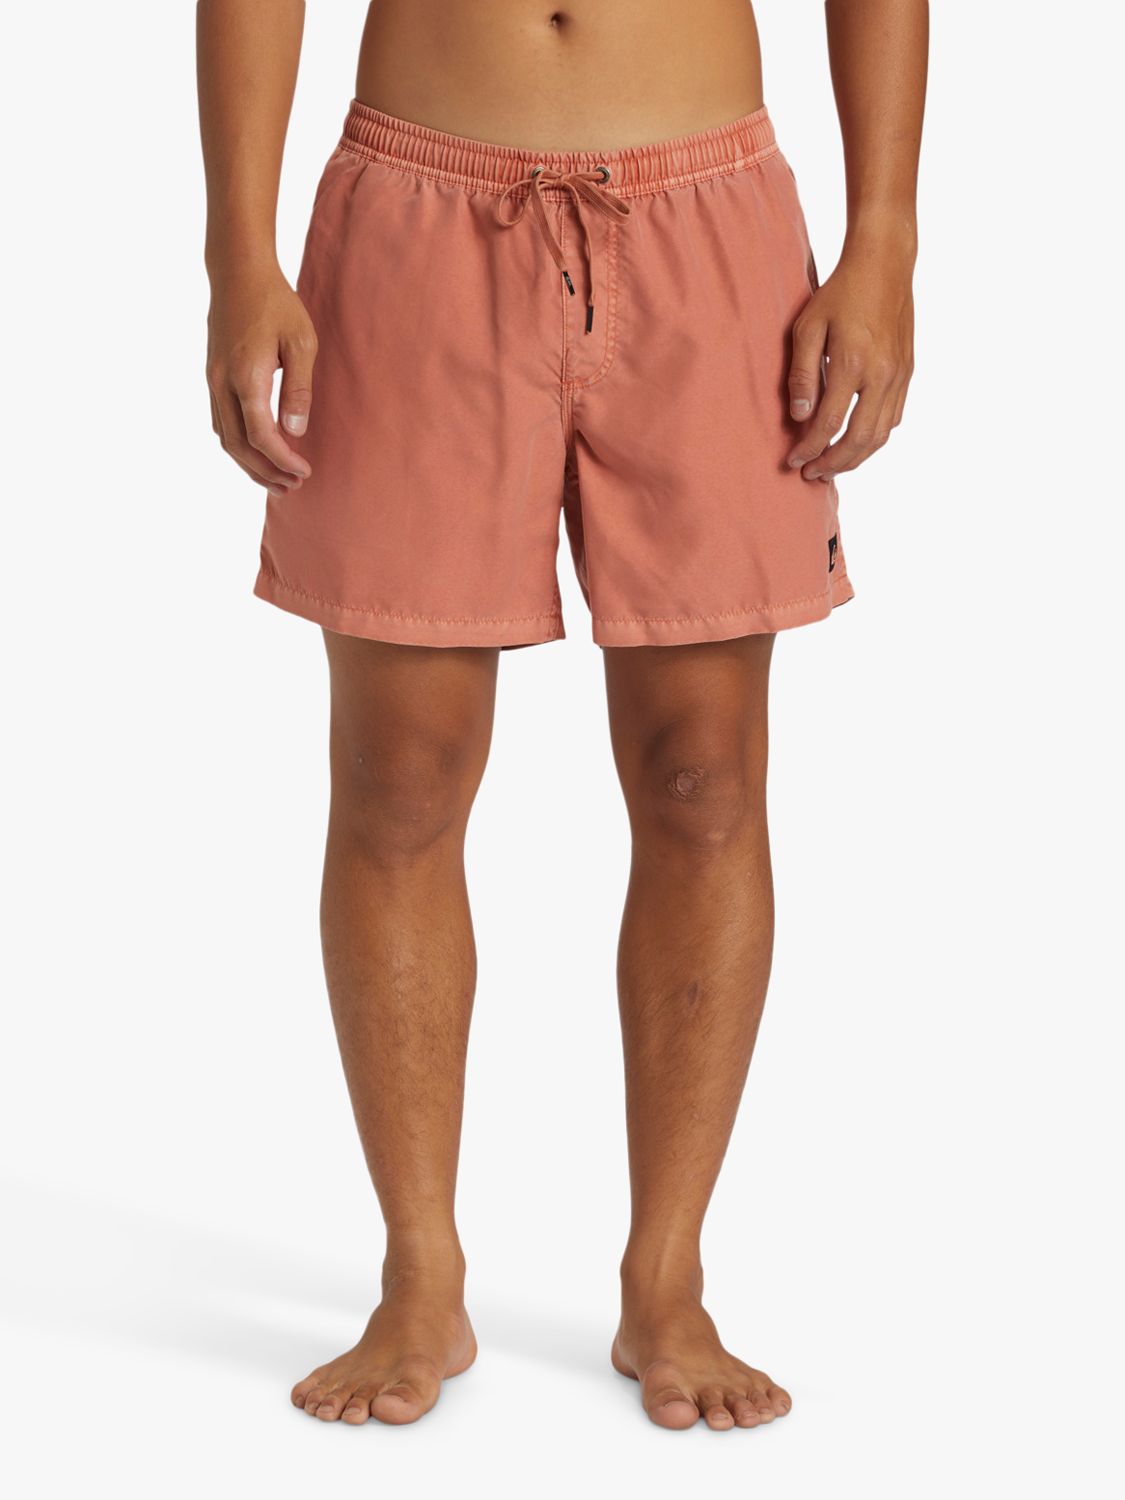 Buy Quiksilver Everyday Collection Recycled Swim Shorts, Canyon Clay Online at johnlewis.com